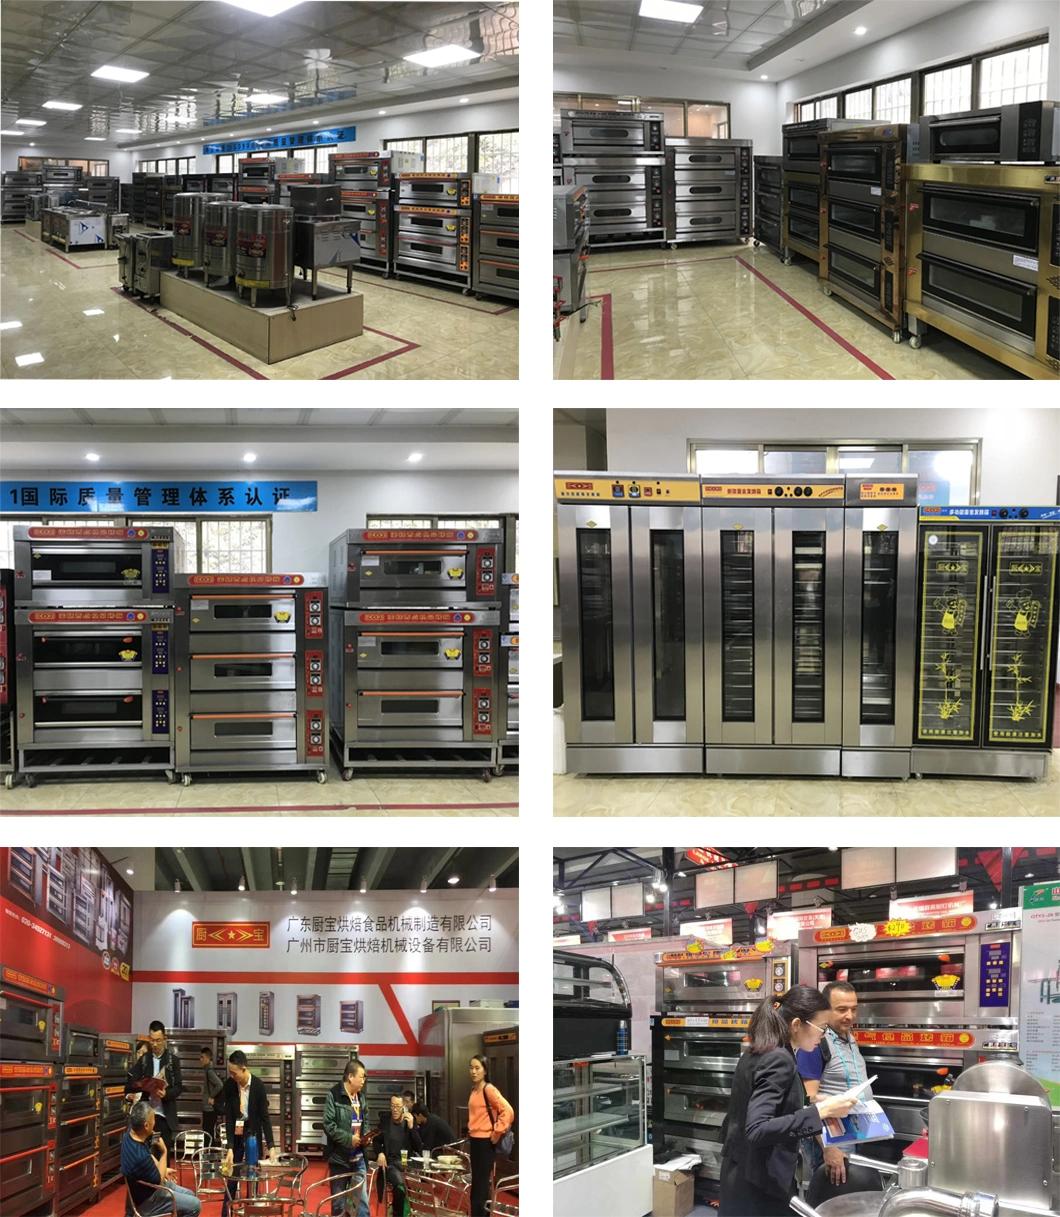 4 Deck 16 Trays Electric Oven for Commercial Restaurant Kitchen Baking Equipment Bakery Machinery Food Machine